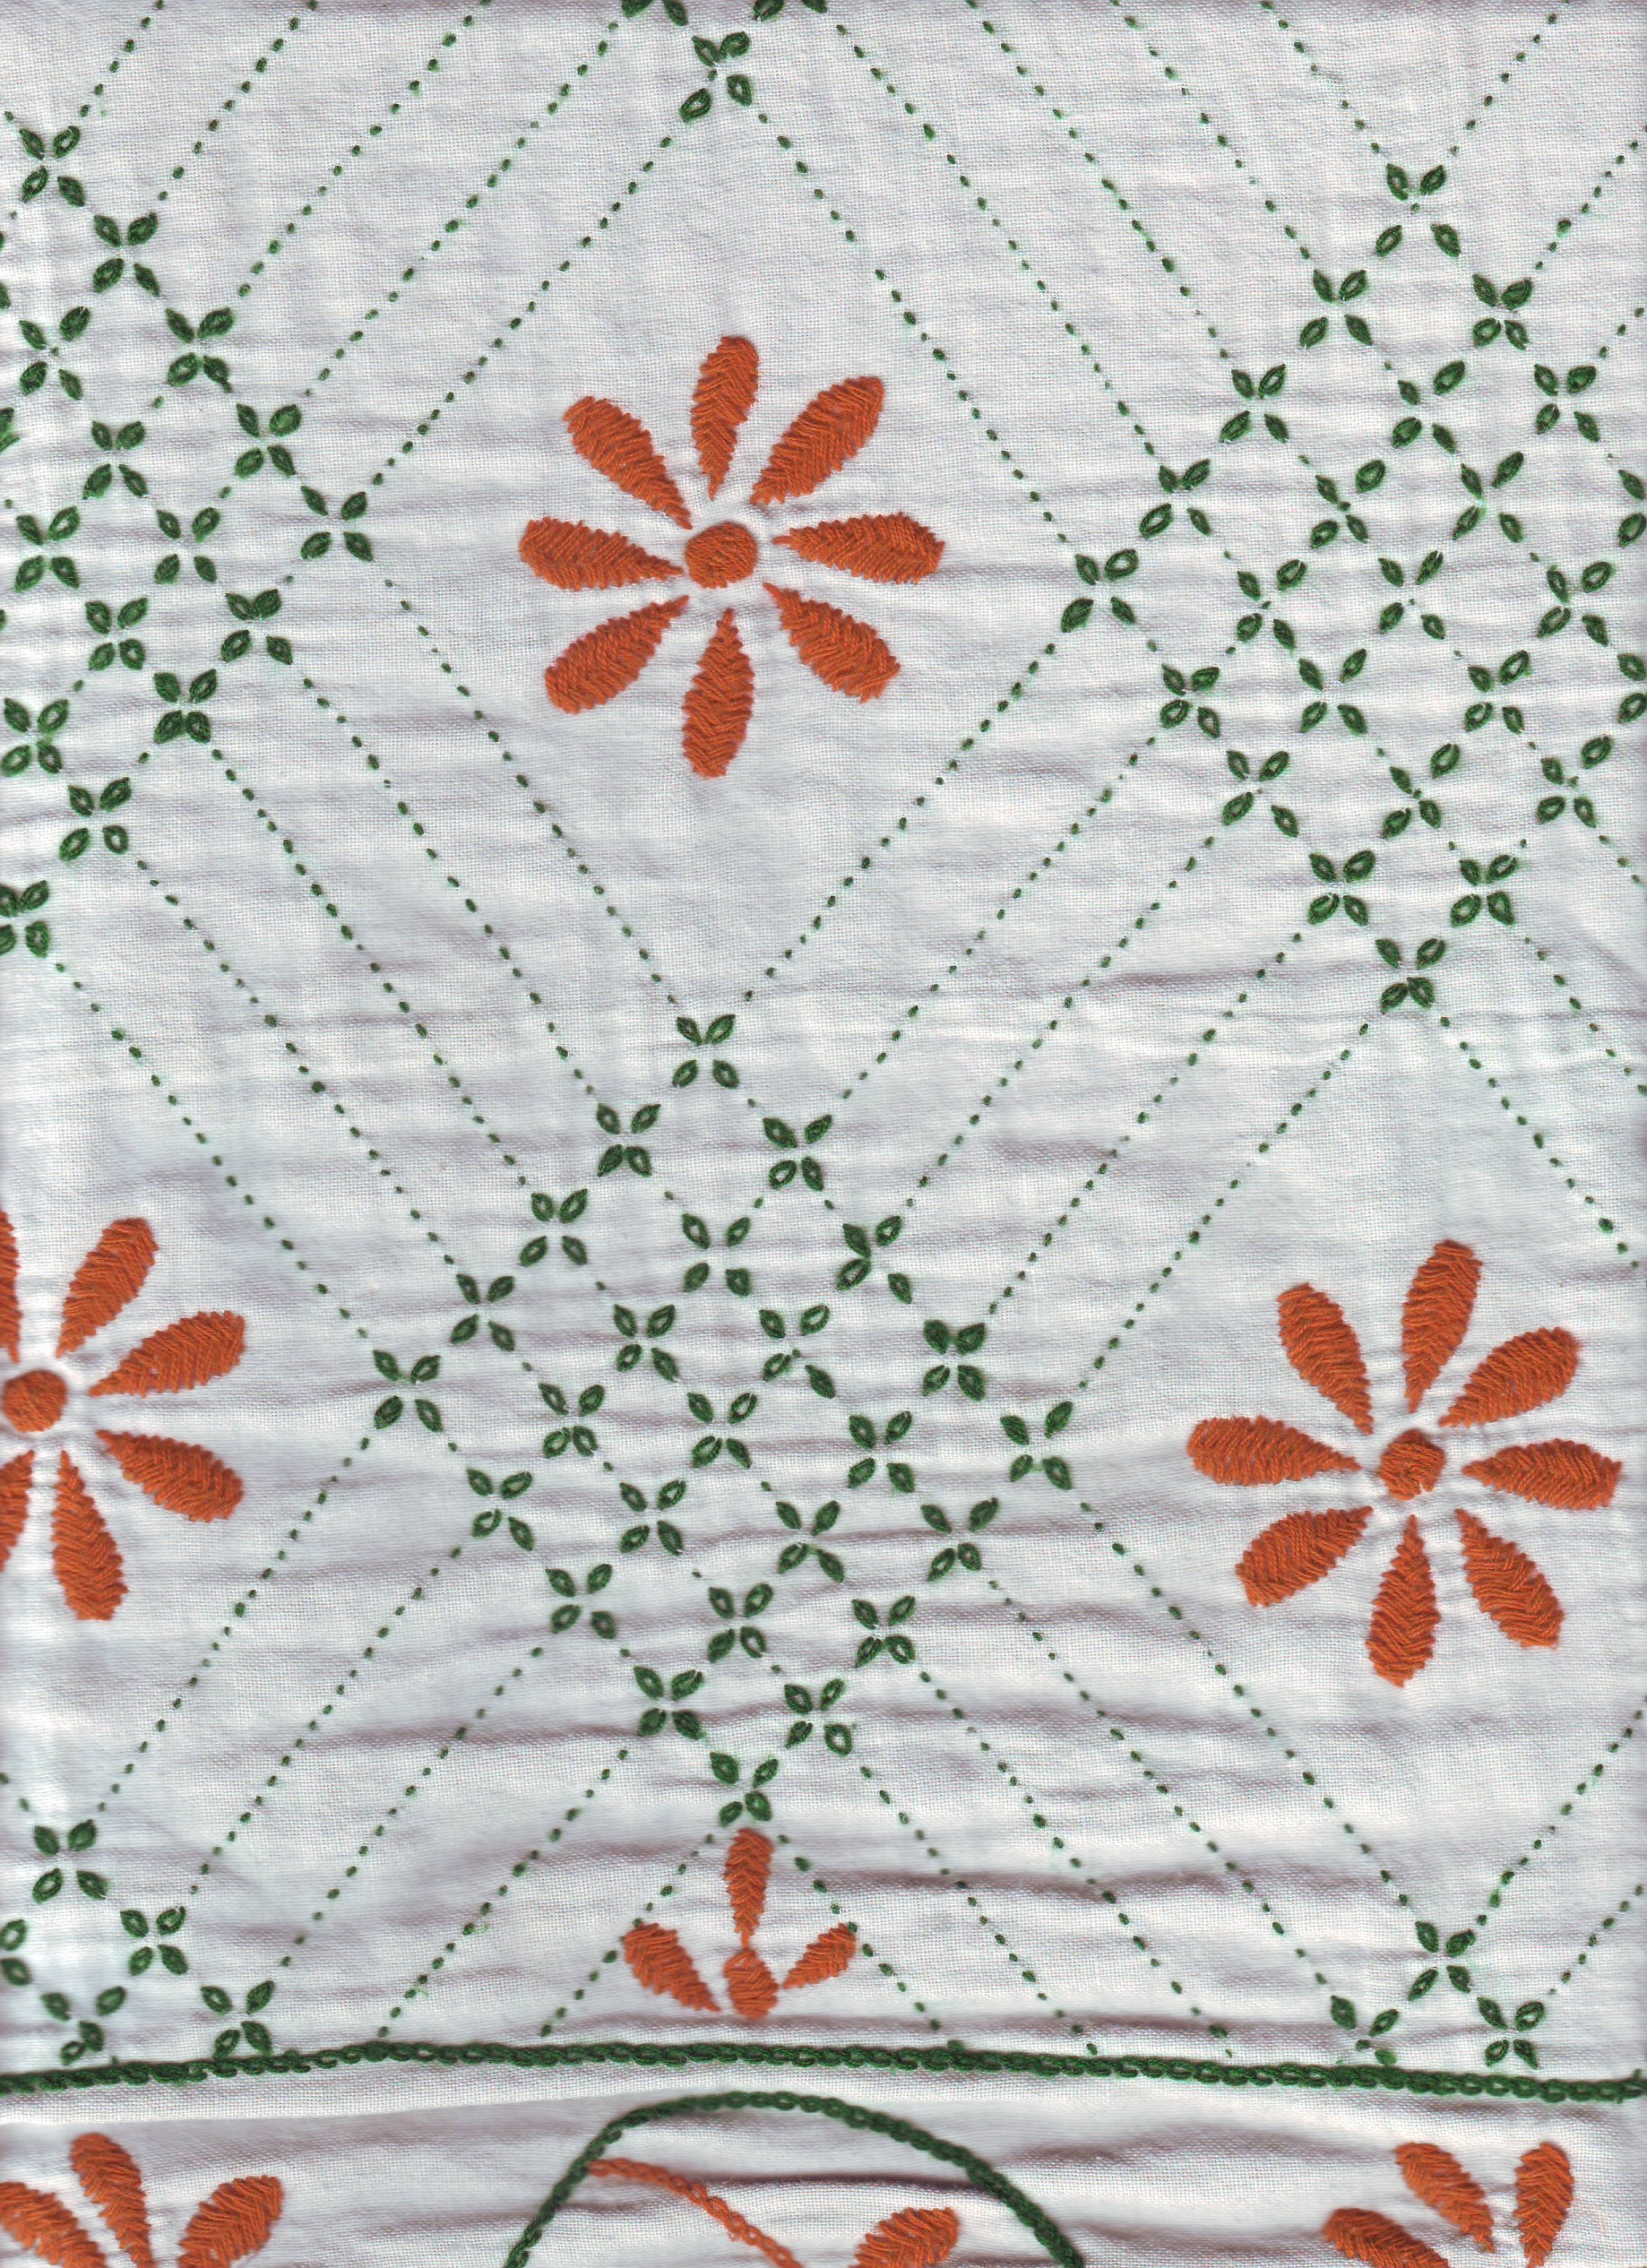 Kantha Work Embroidery Patterns Kantha Is An Important Tool In Green Movement Shree Neelkanth